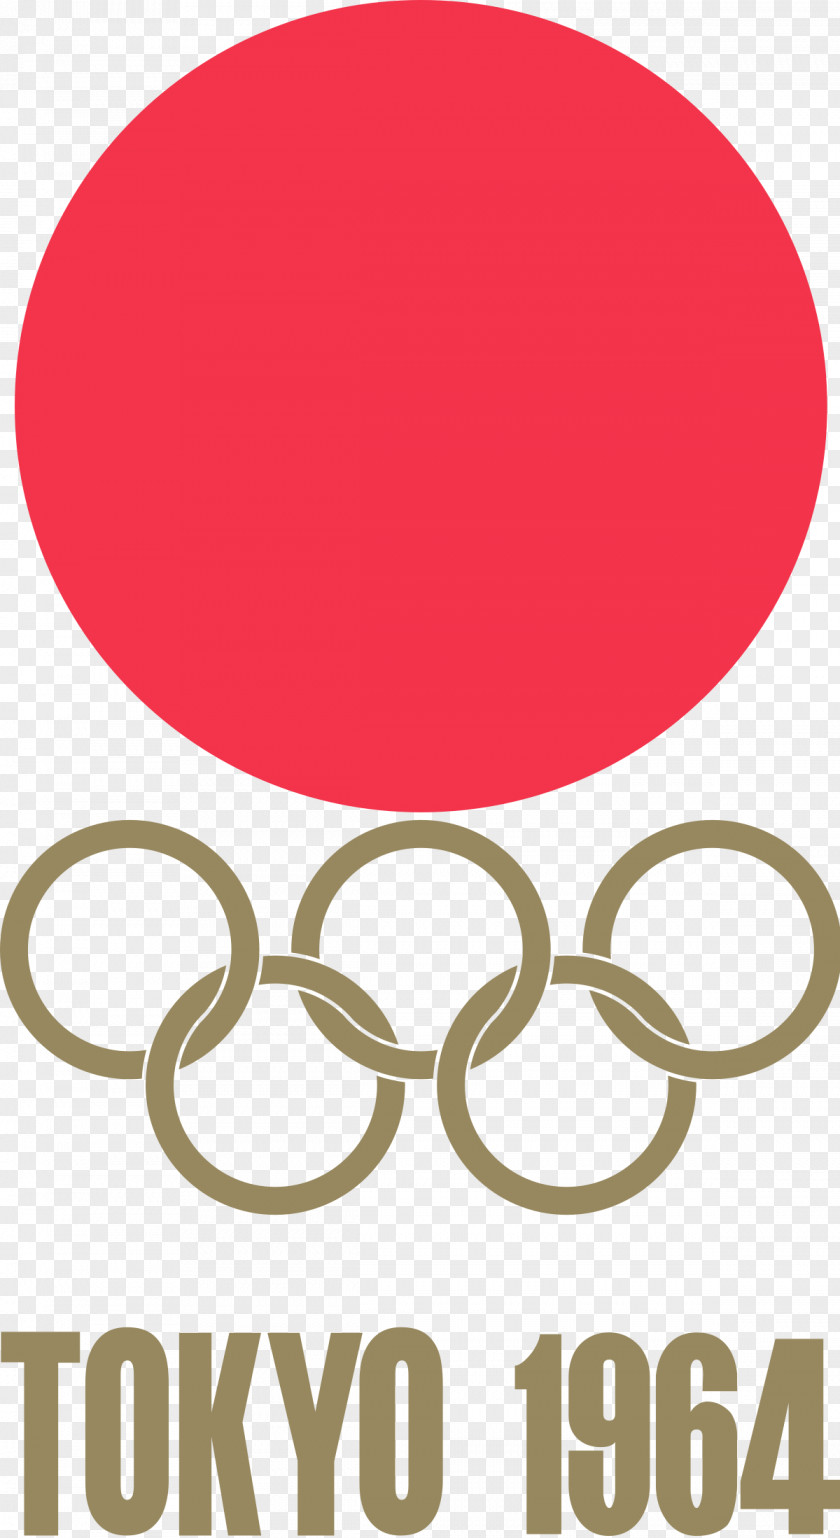 Olympics 1964 Summer 2020 1940 Winter Olympic Games PNG